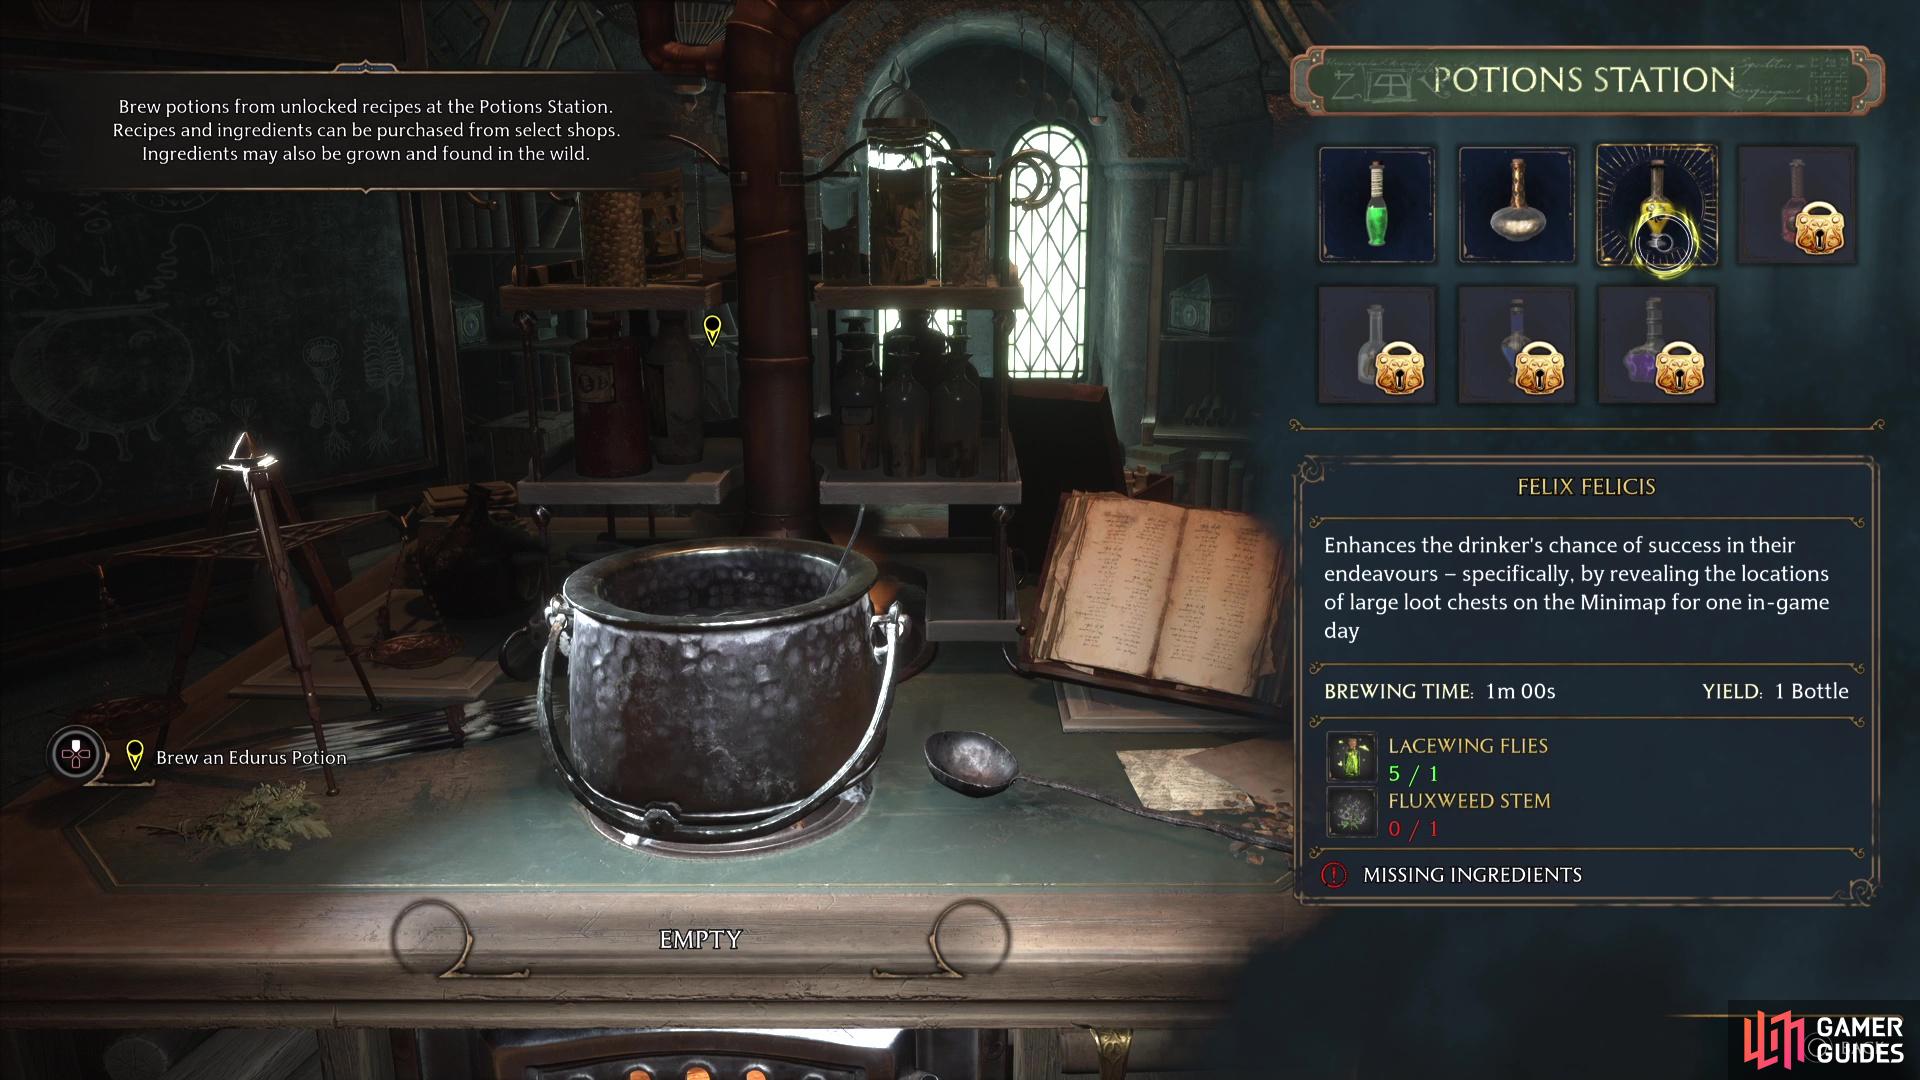 You can brew the Felix Felicis Potion at the Potions Station.